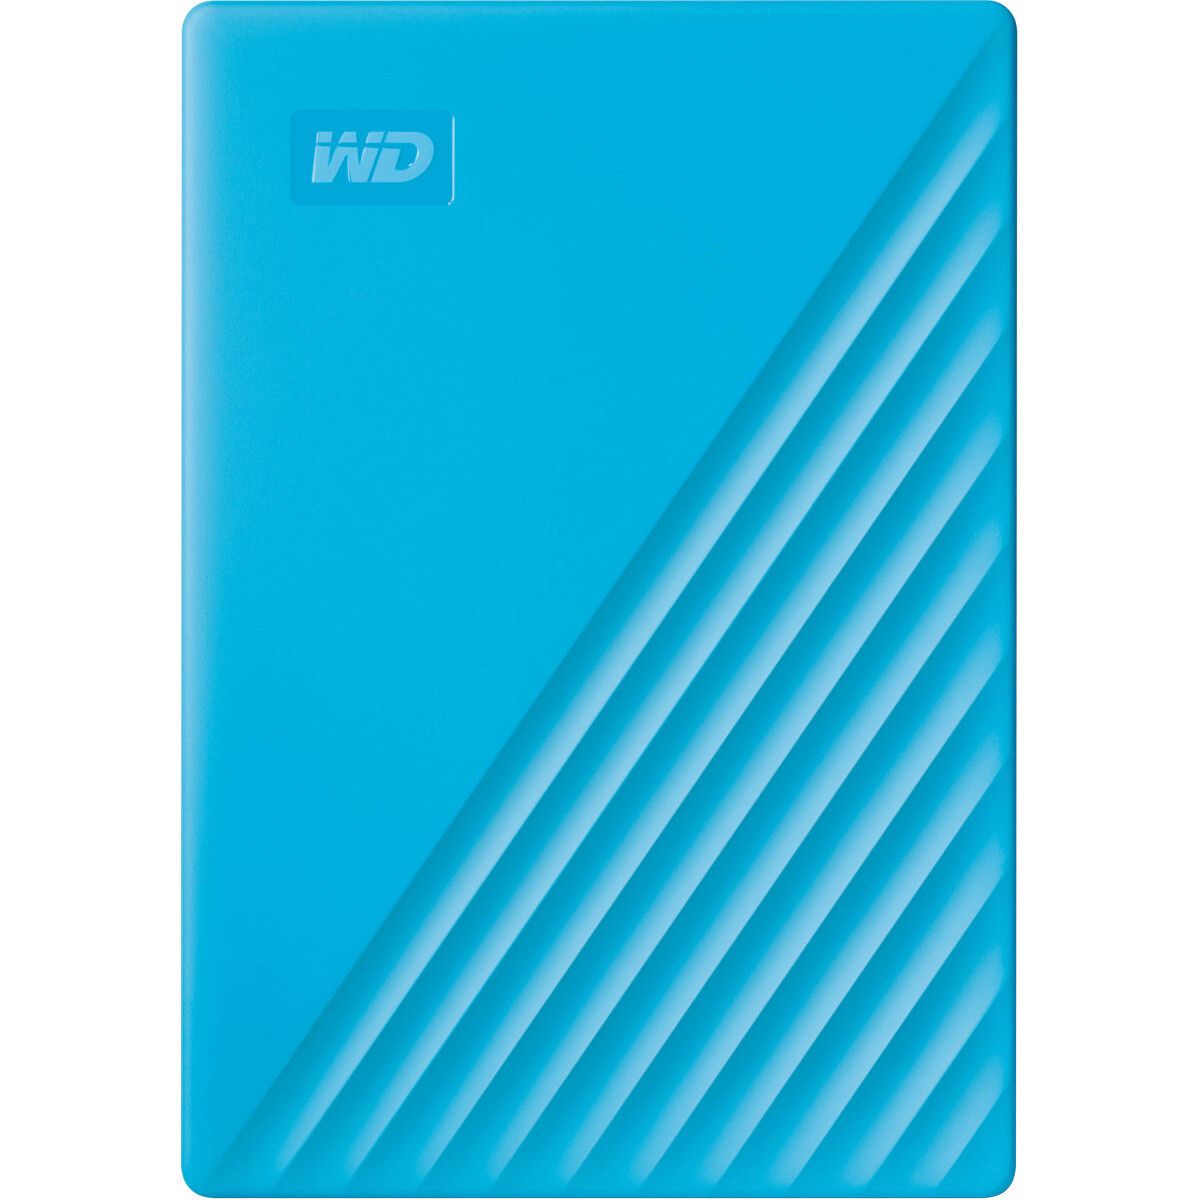 Get a nice 4TB external hard drive and save $30 at Staples! WD is a trusted brand for hard drives, so you know that your data is in good hands.